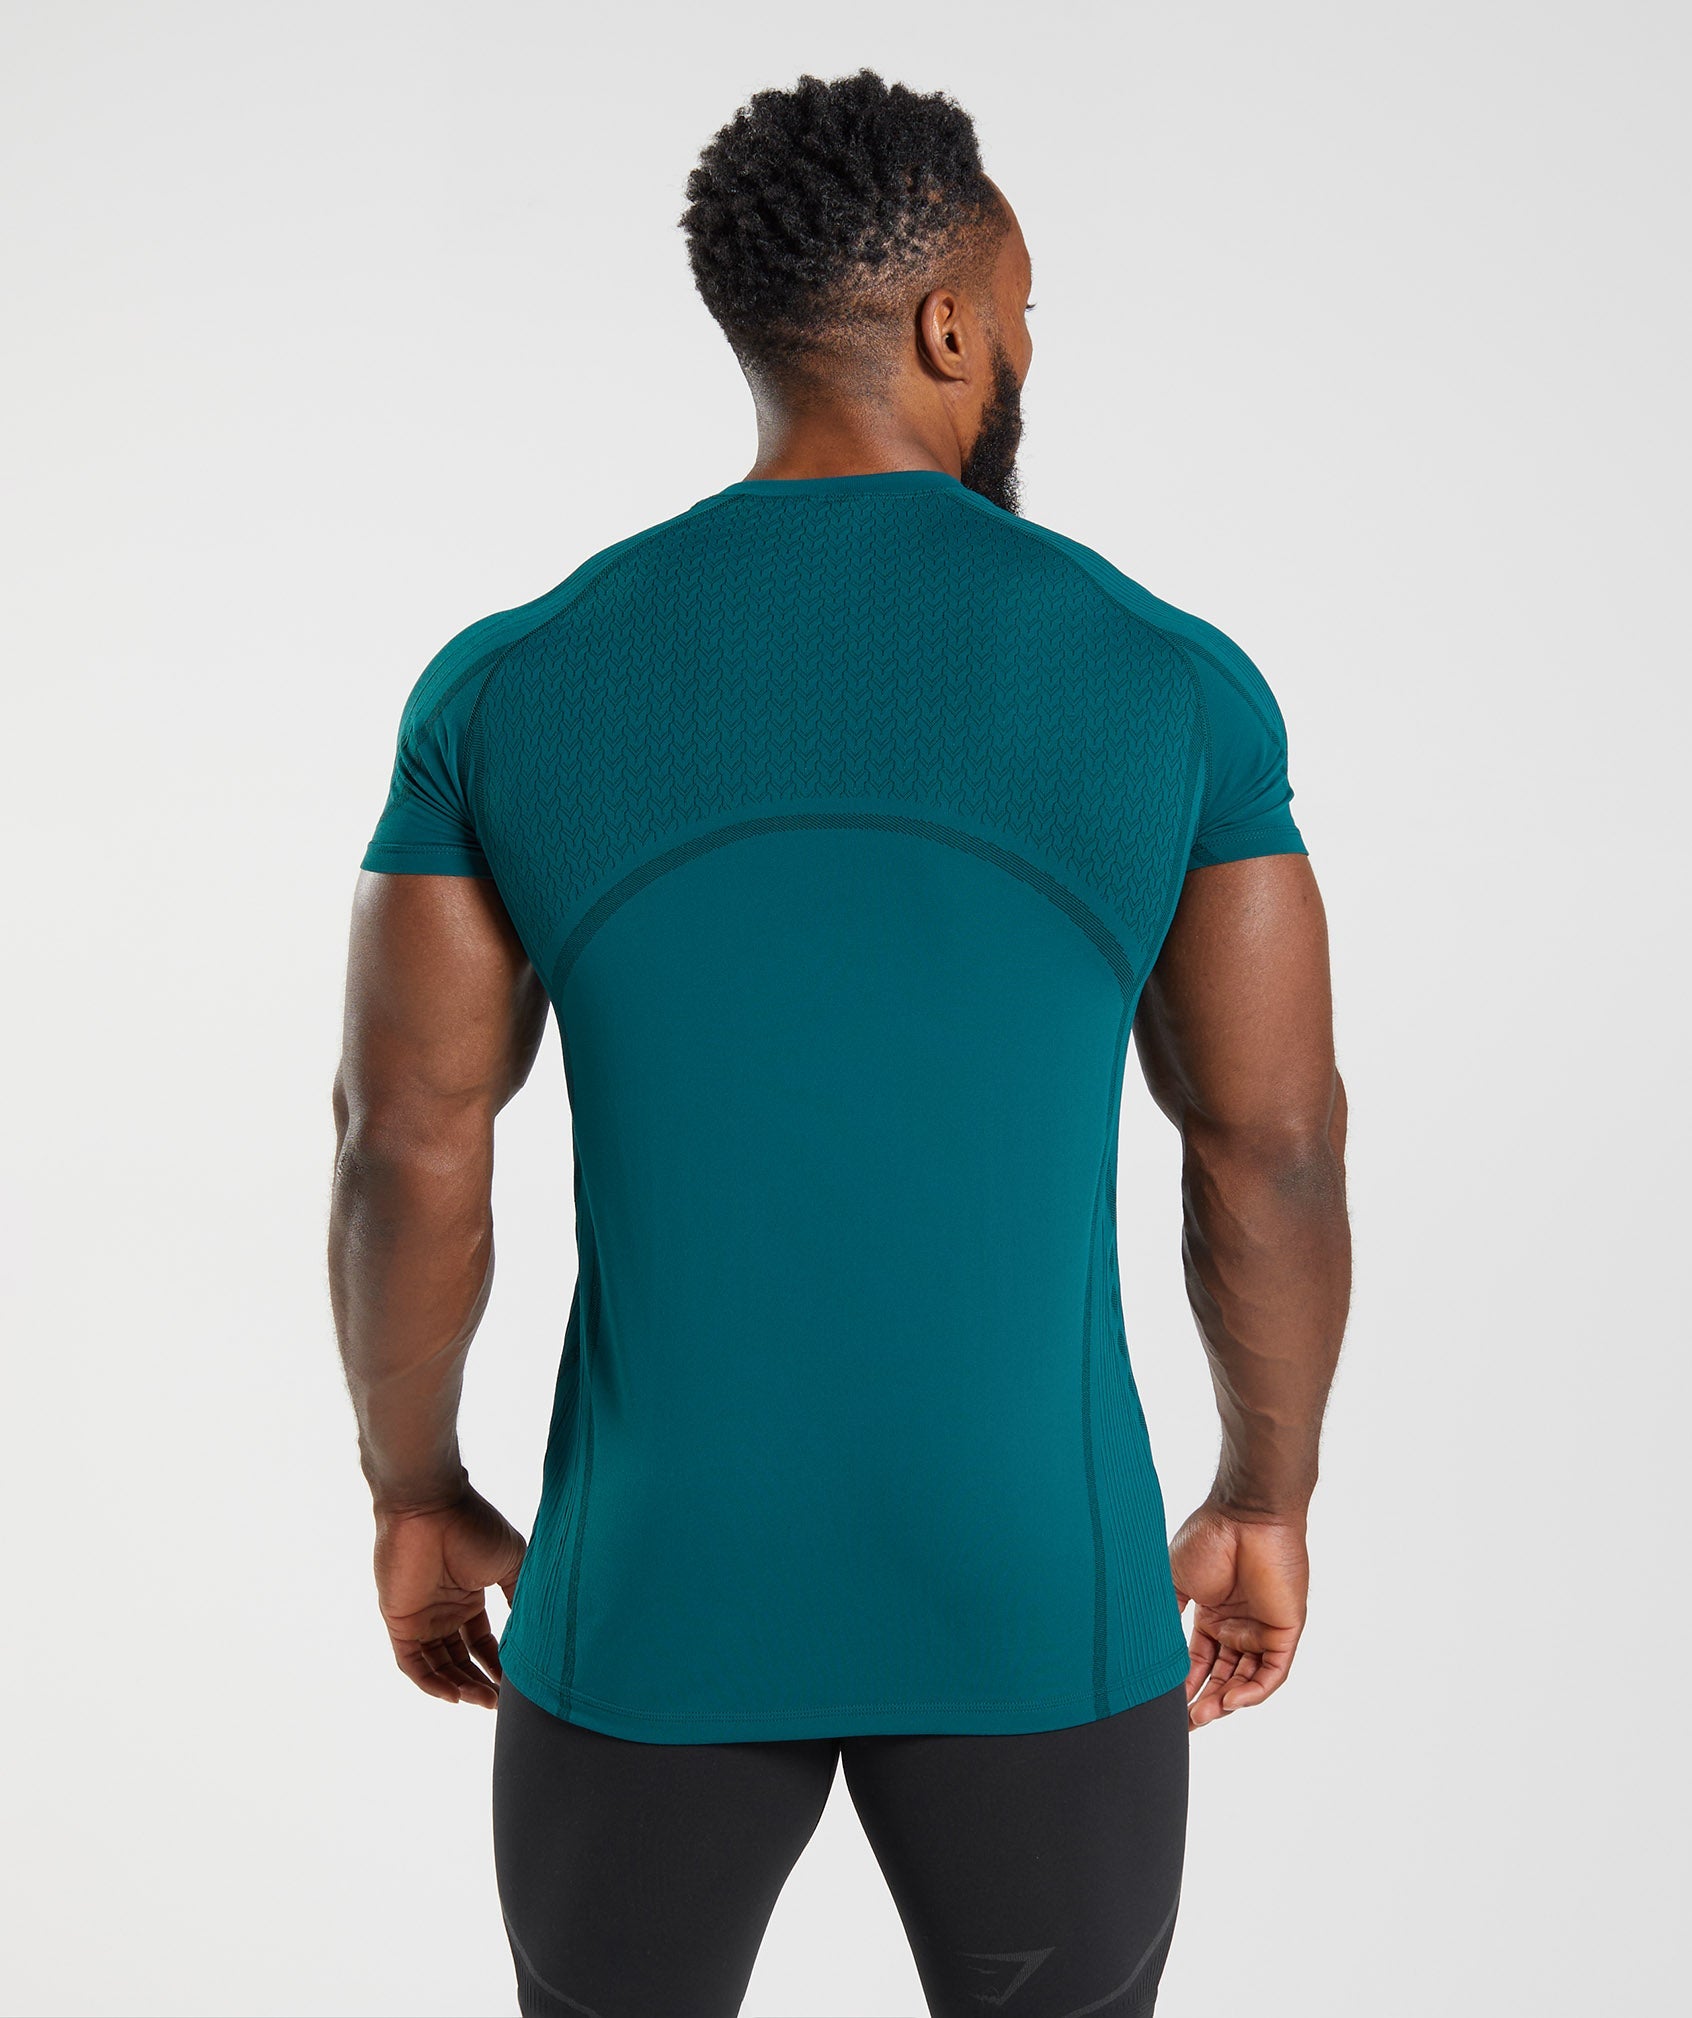 315 Seamless T-Shirt in Winter Teal/Black - view 2